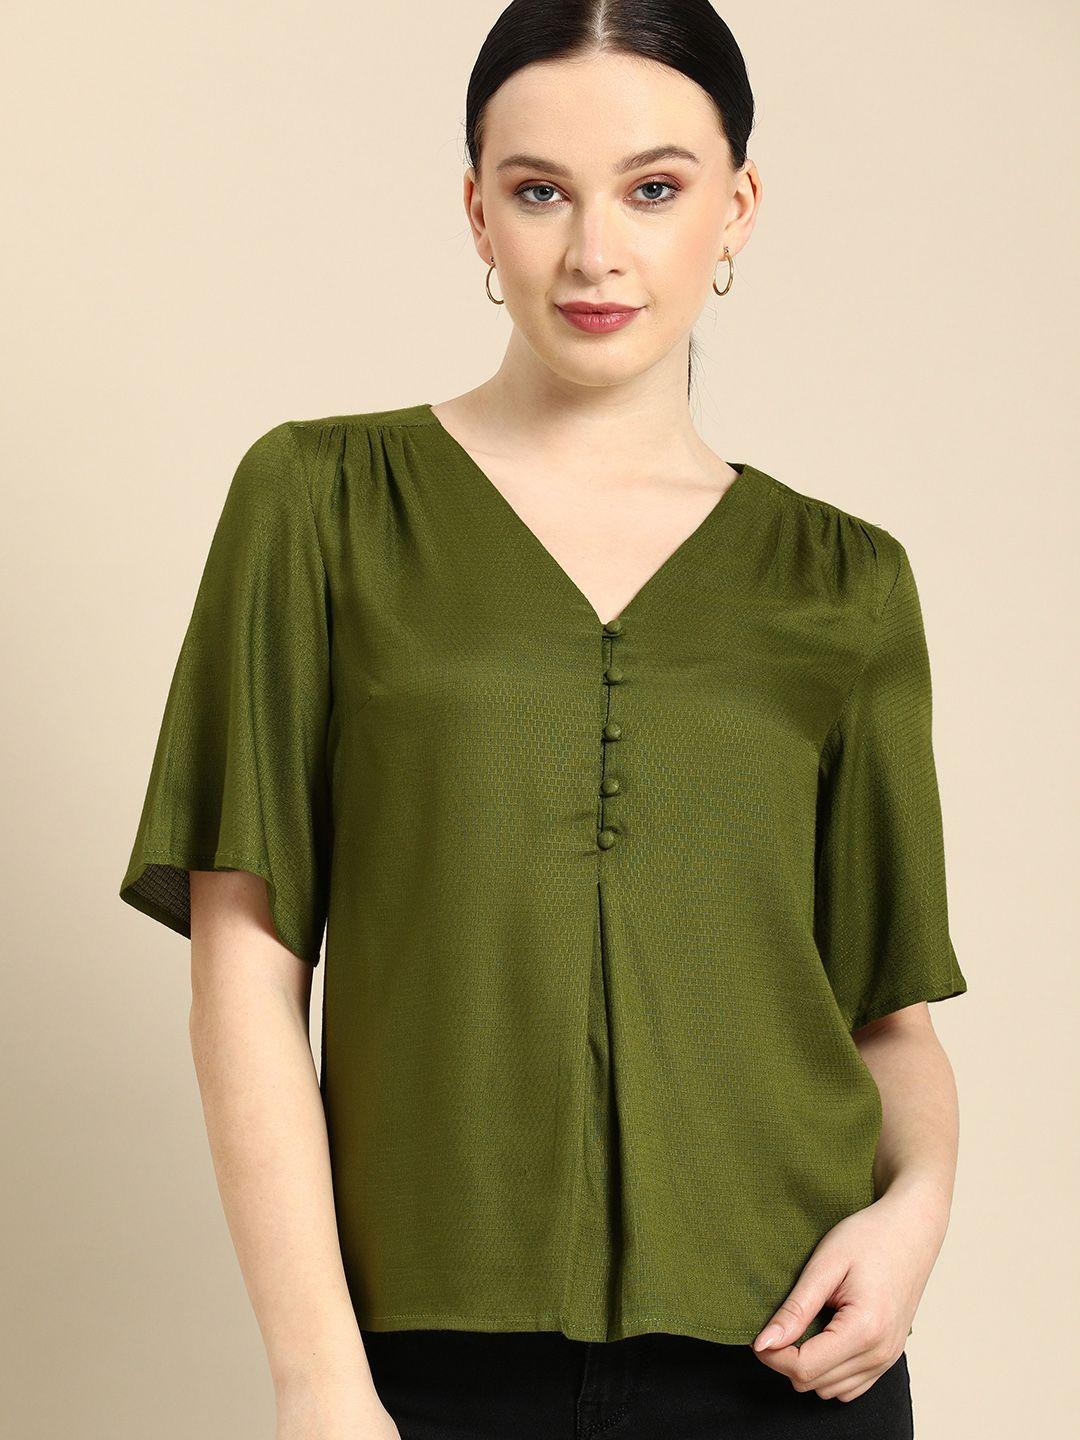 all-about-you-solid-olive-green-v-neck-regular-top